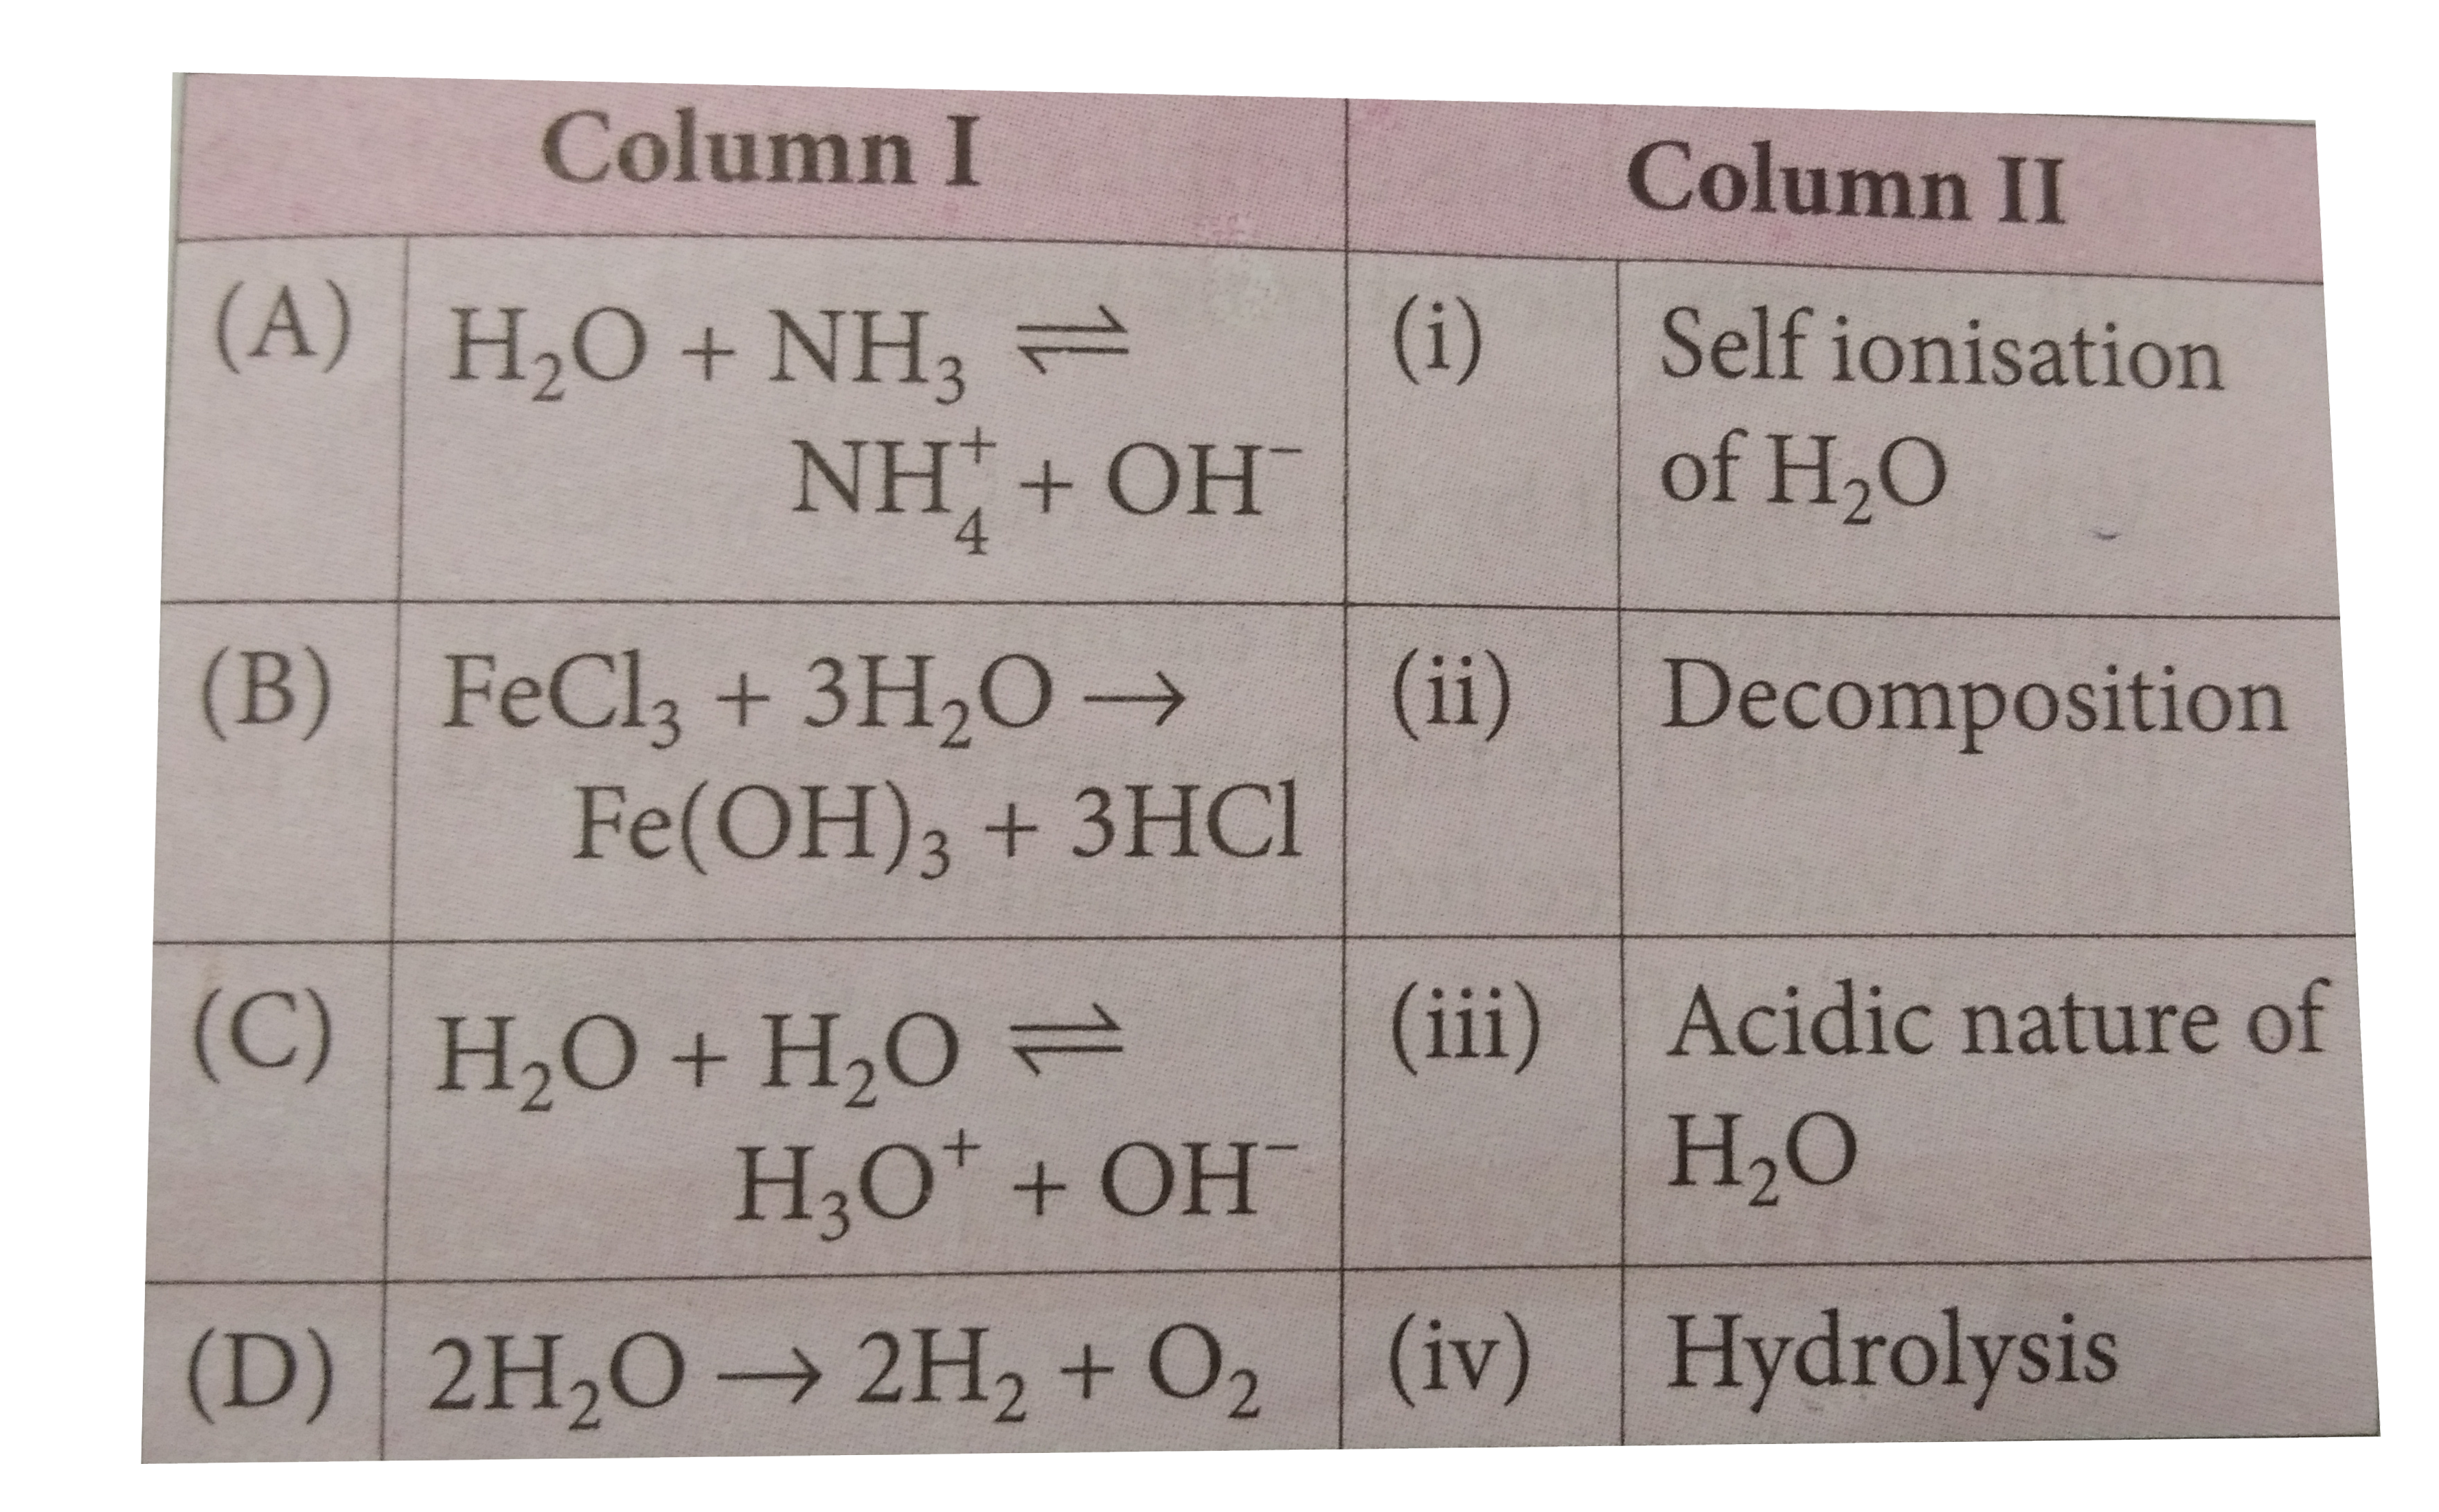 Match the reactions of column I with their types given in column II and mark the appropriate choice.